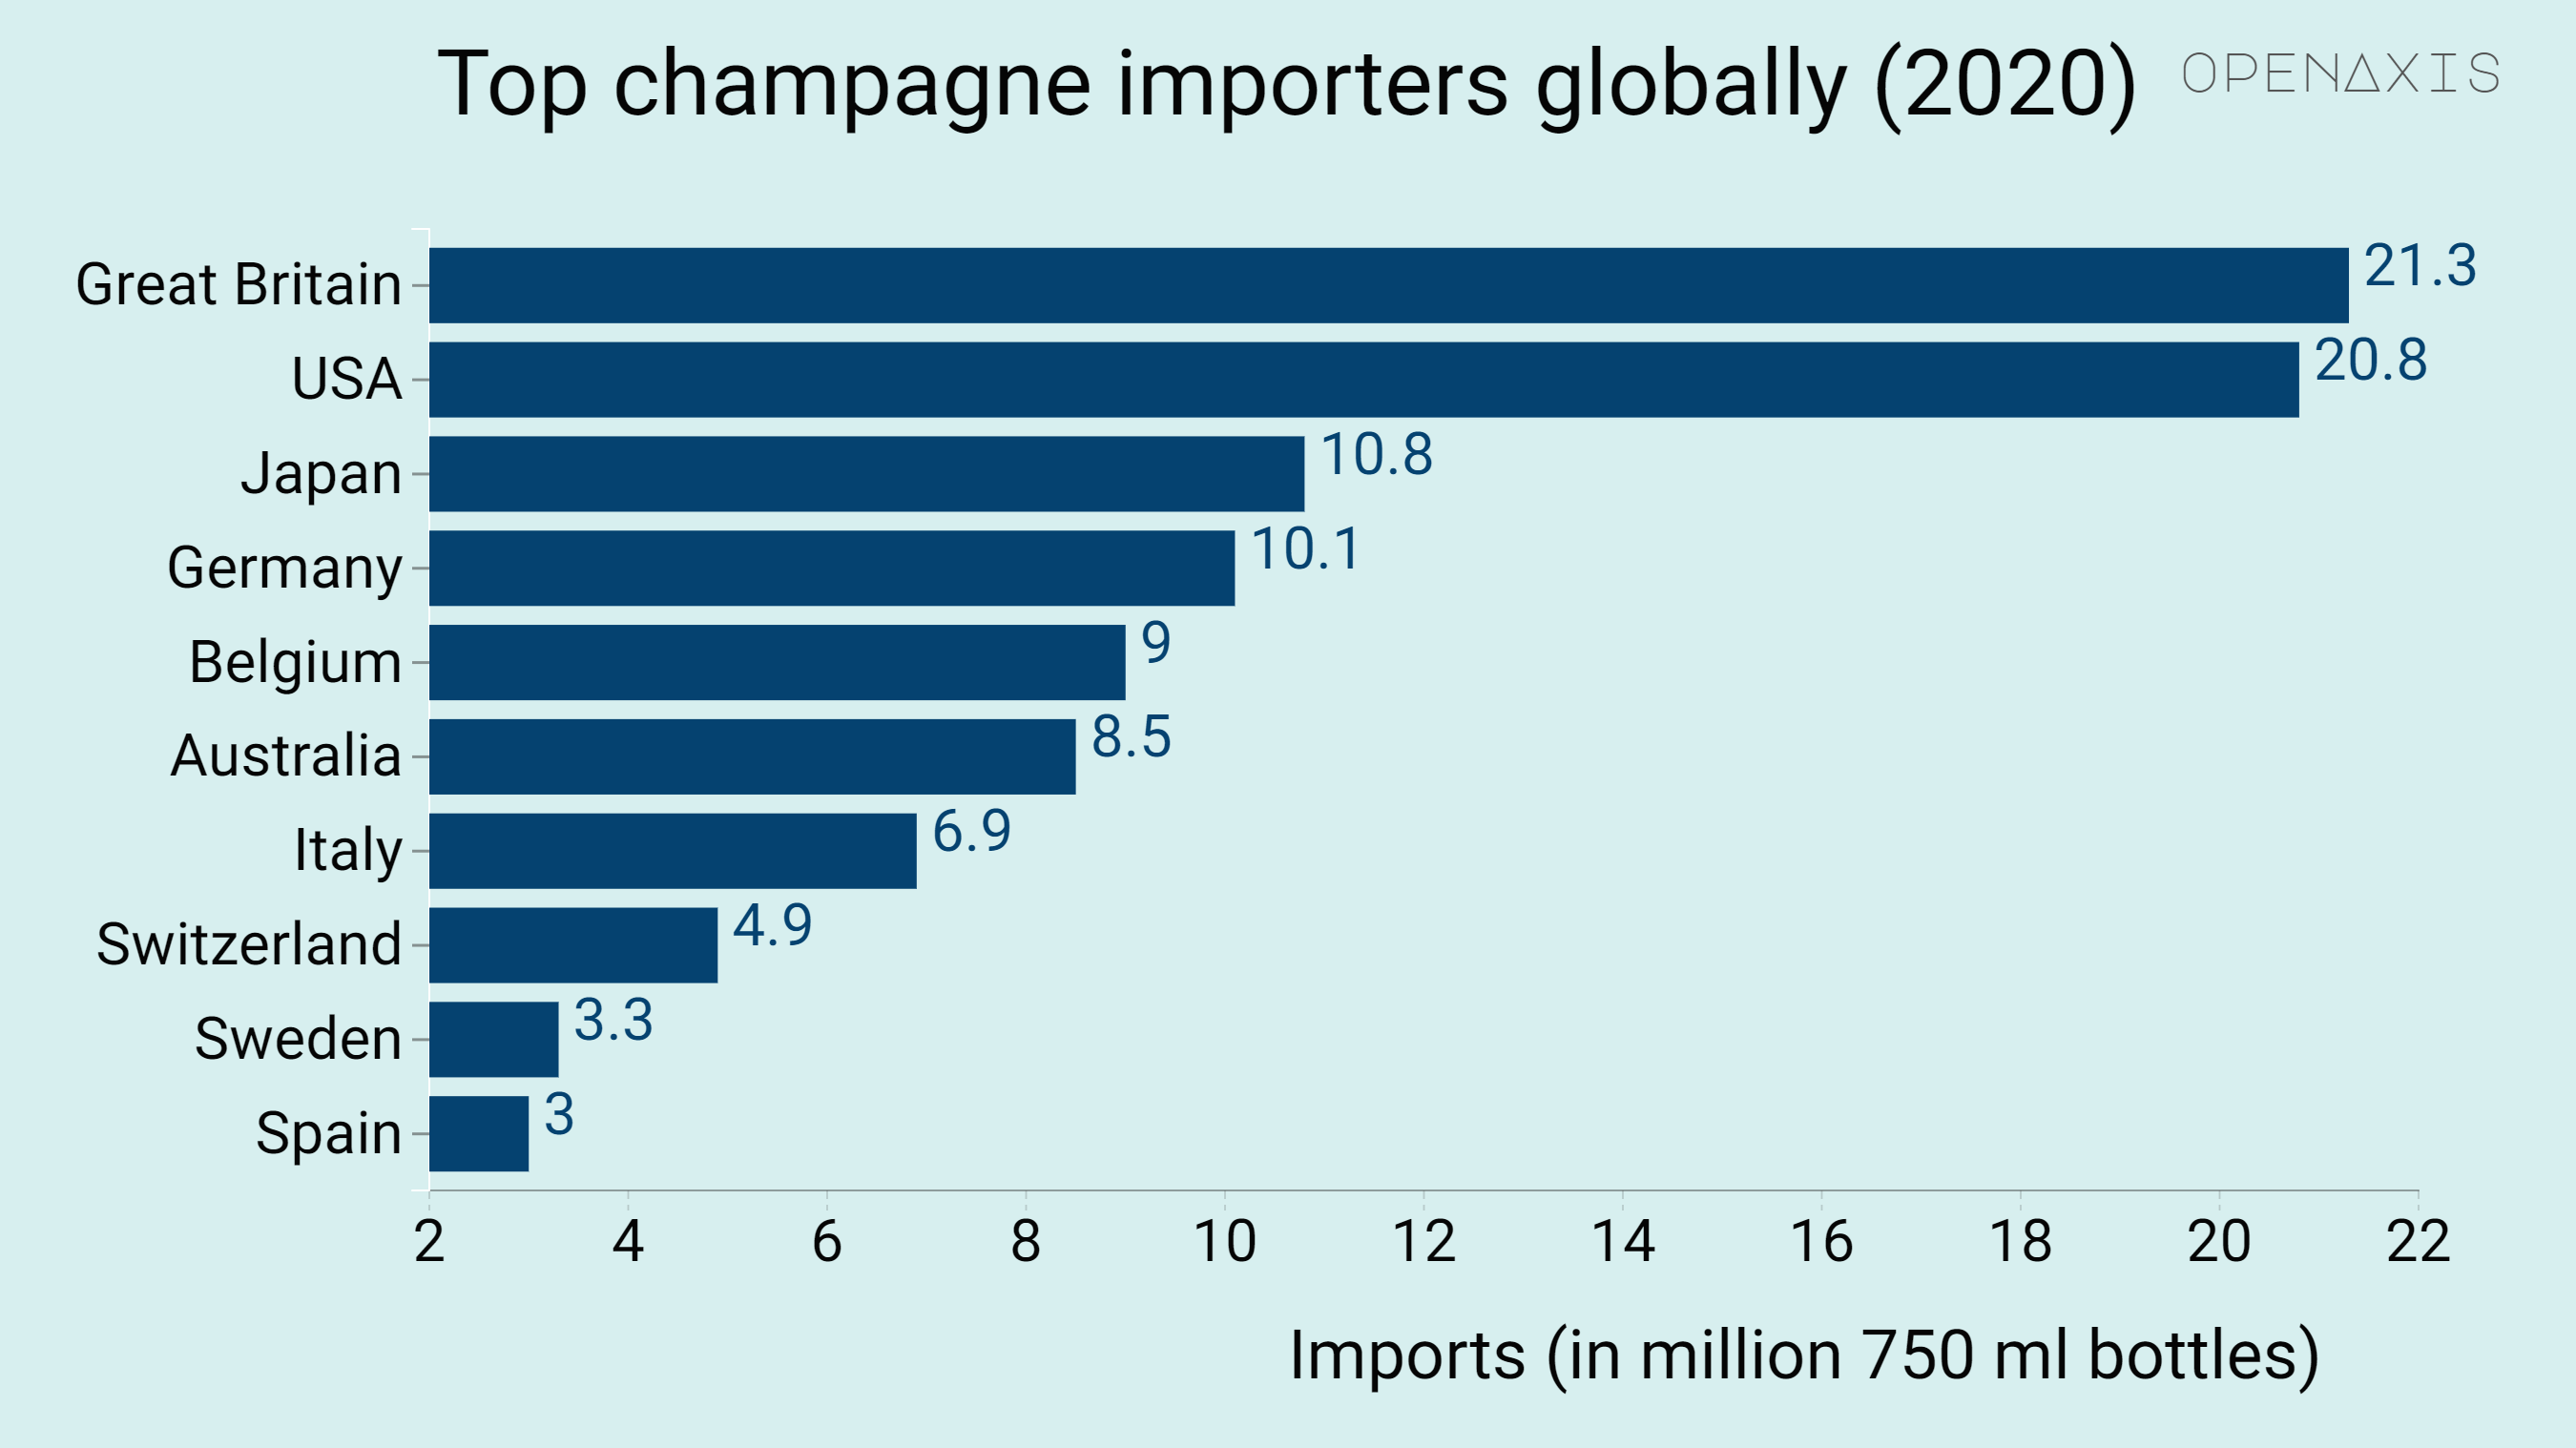 "Top champagne importers globally (2020)"